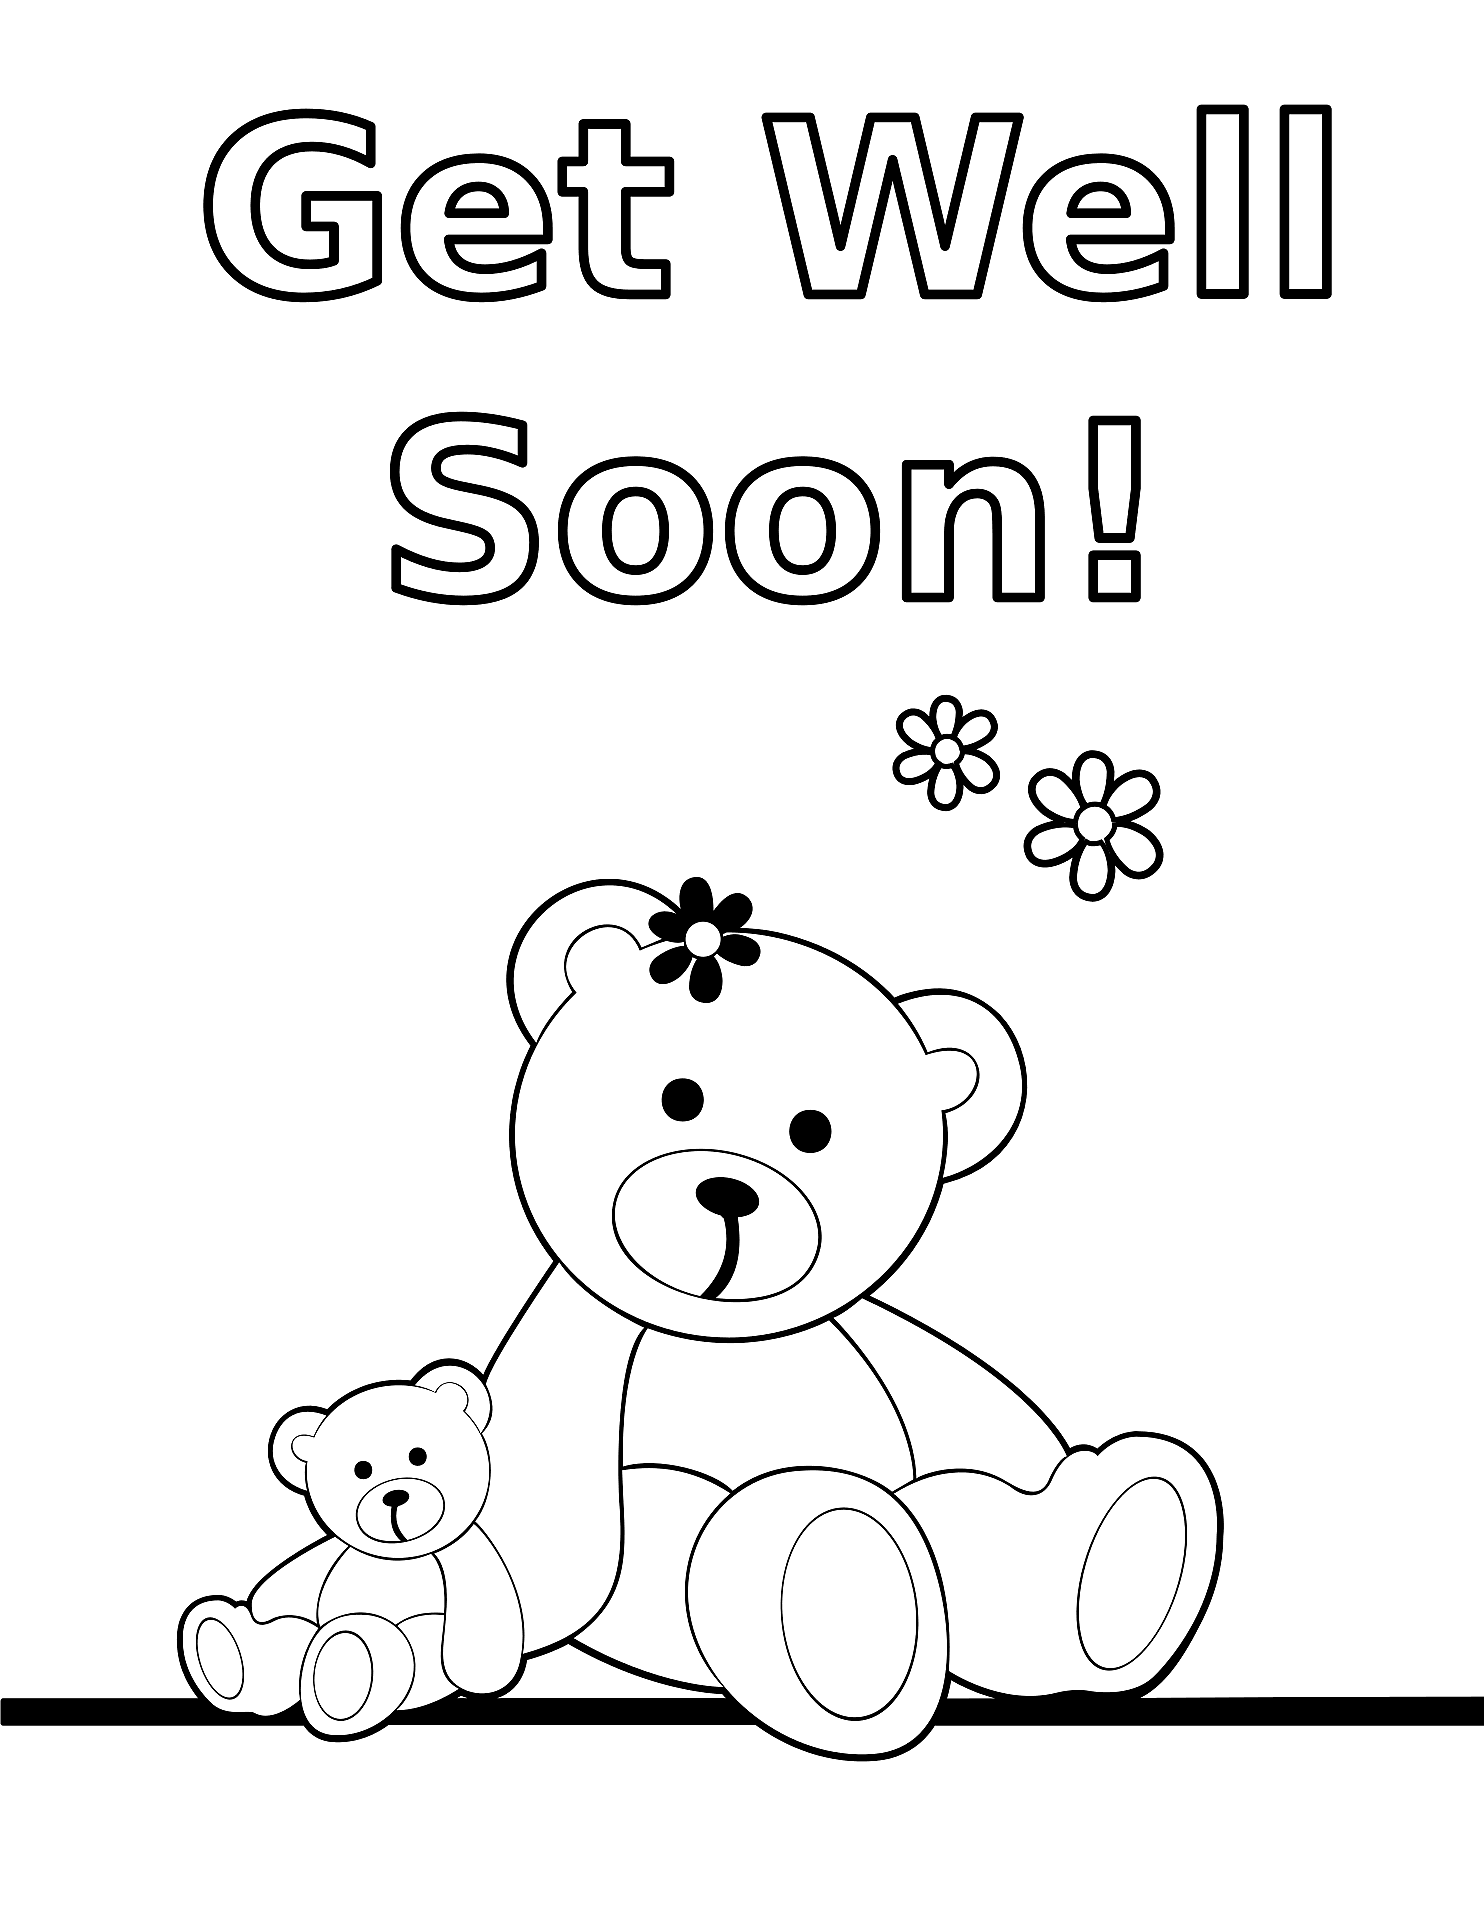 Get Well Soon Clip Art 70 with Clipart Image 25 - Free Clip Art - Clip ...